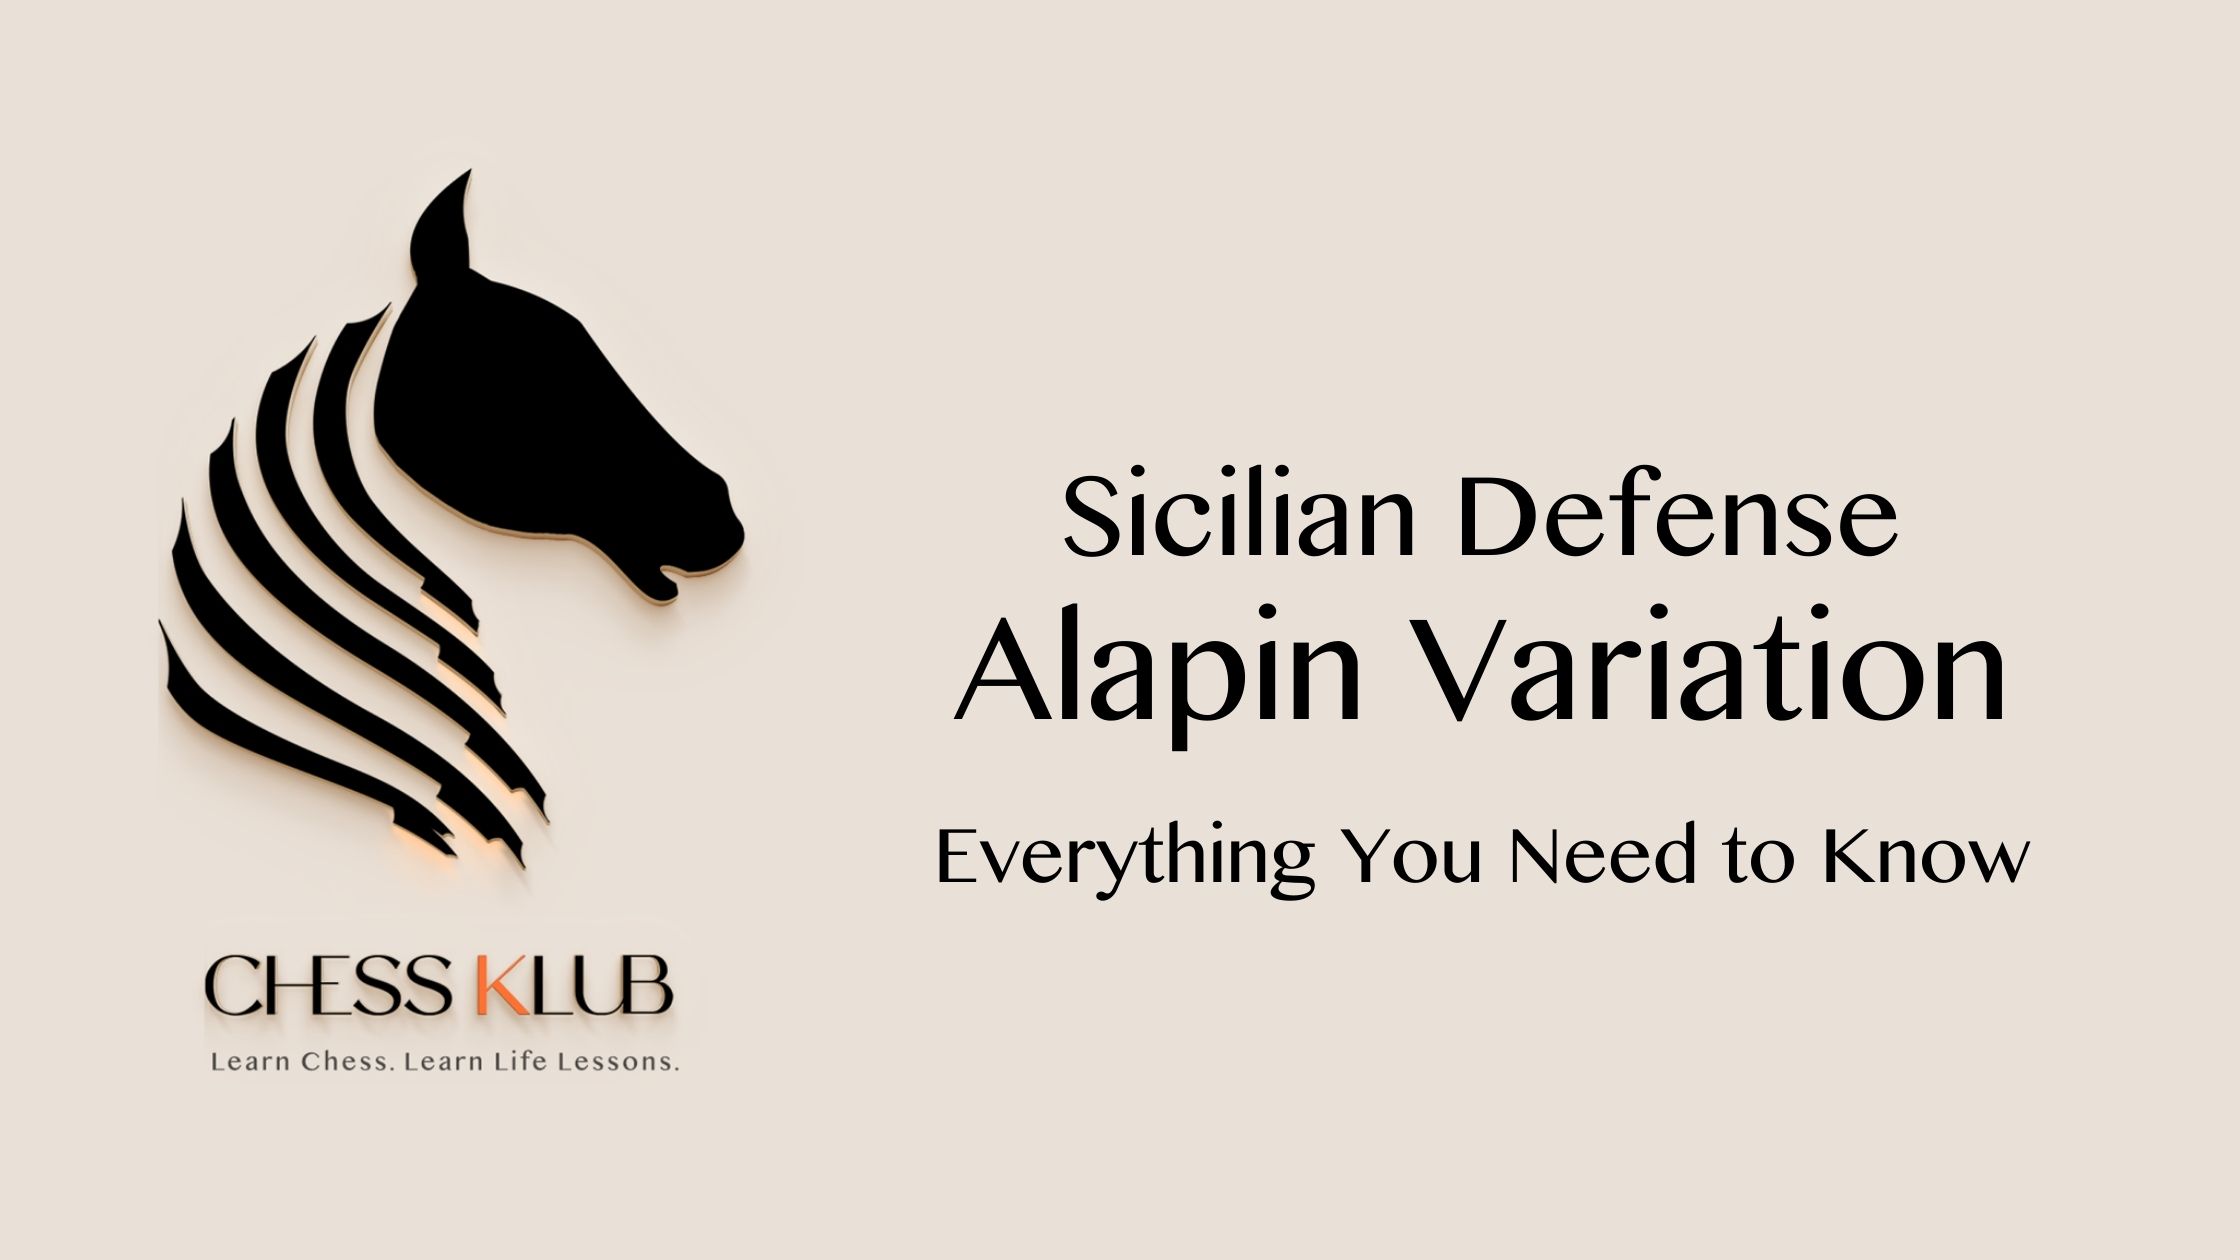 Everything about the Alapin Variation of the Sicilian Defense